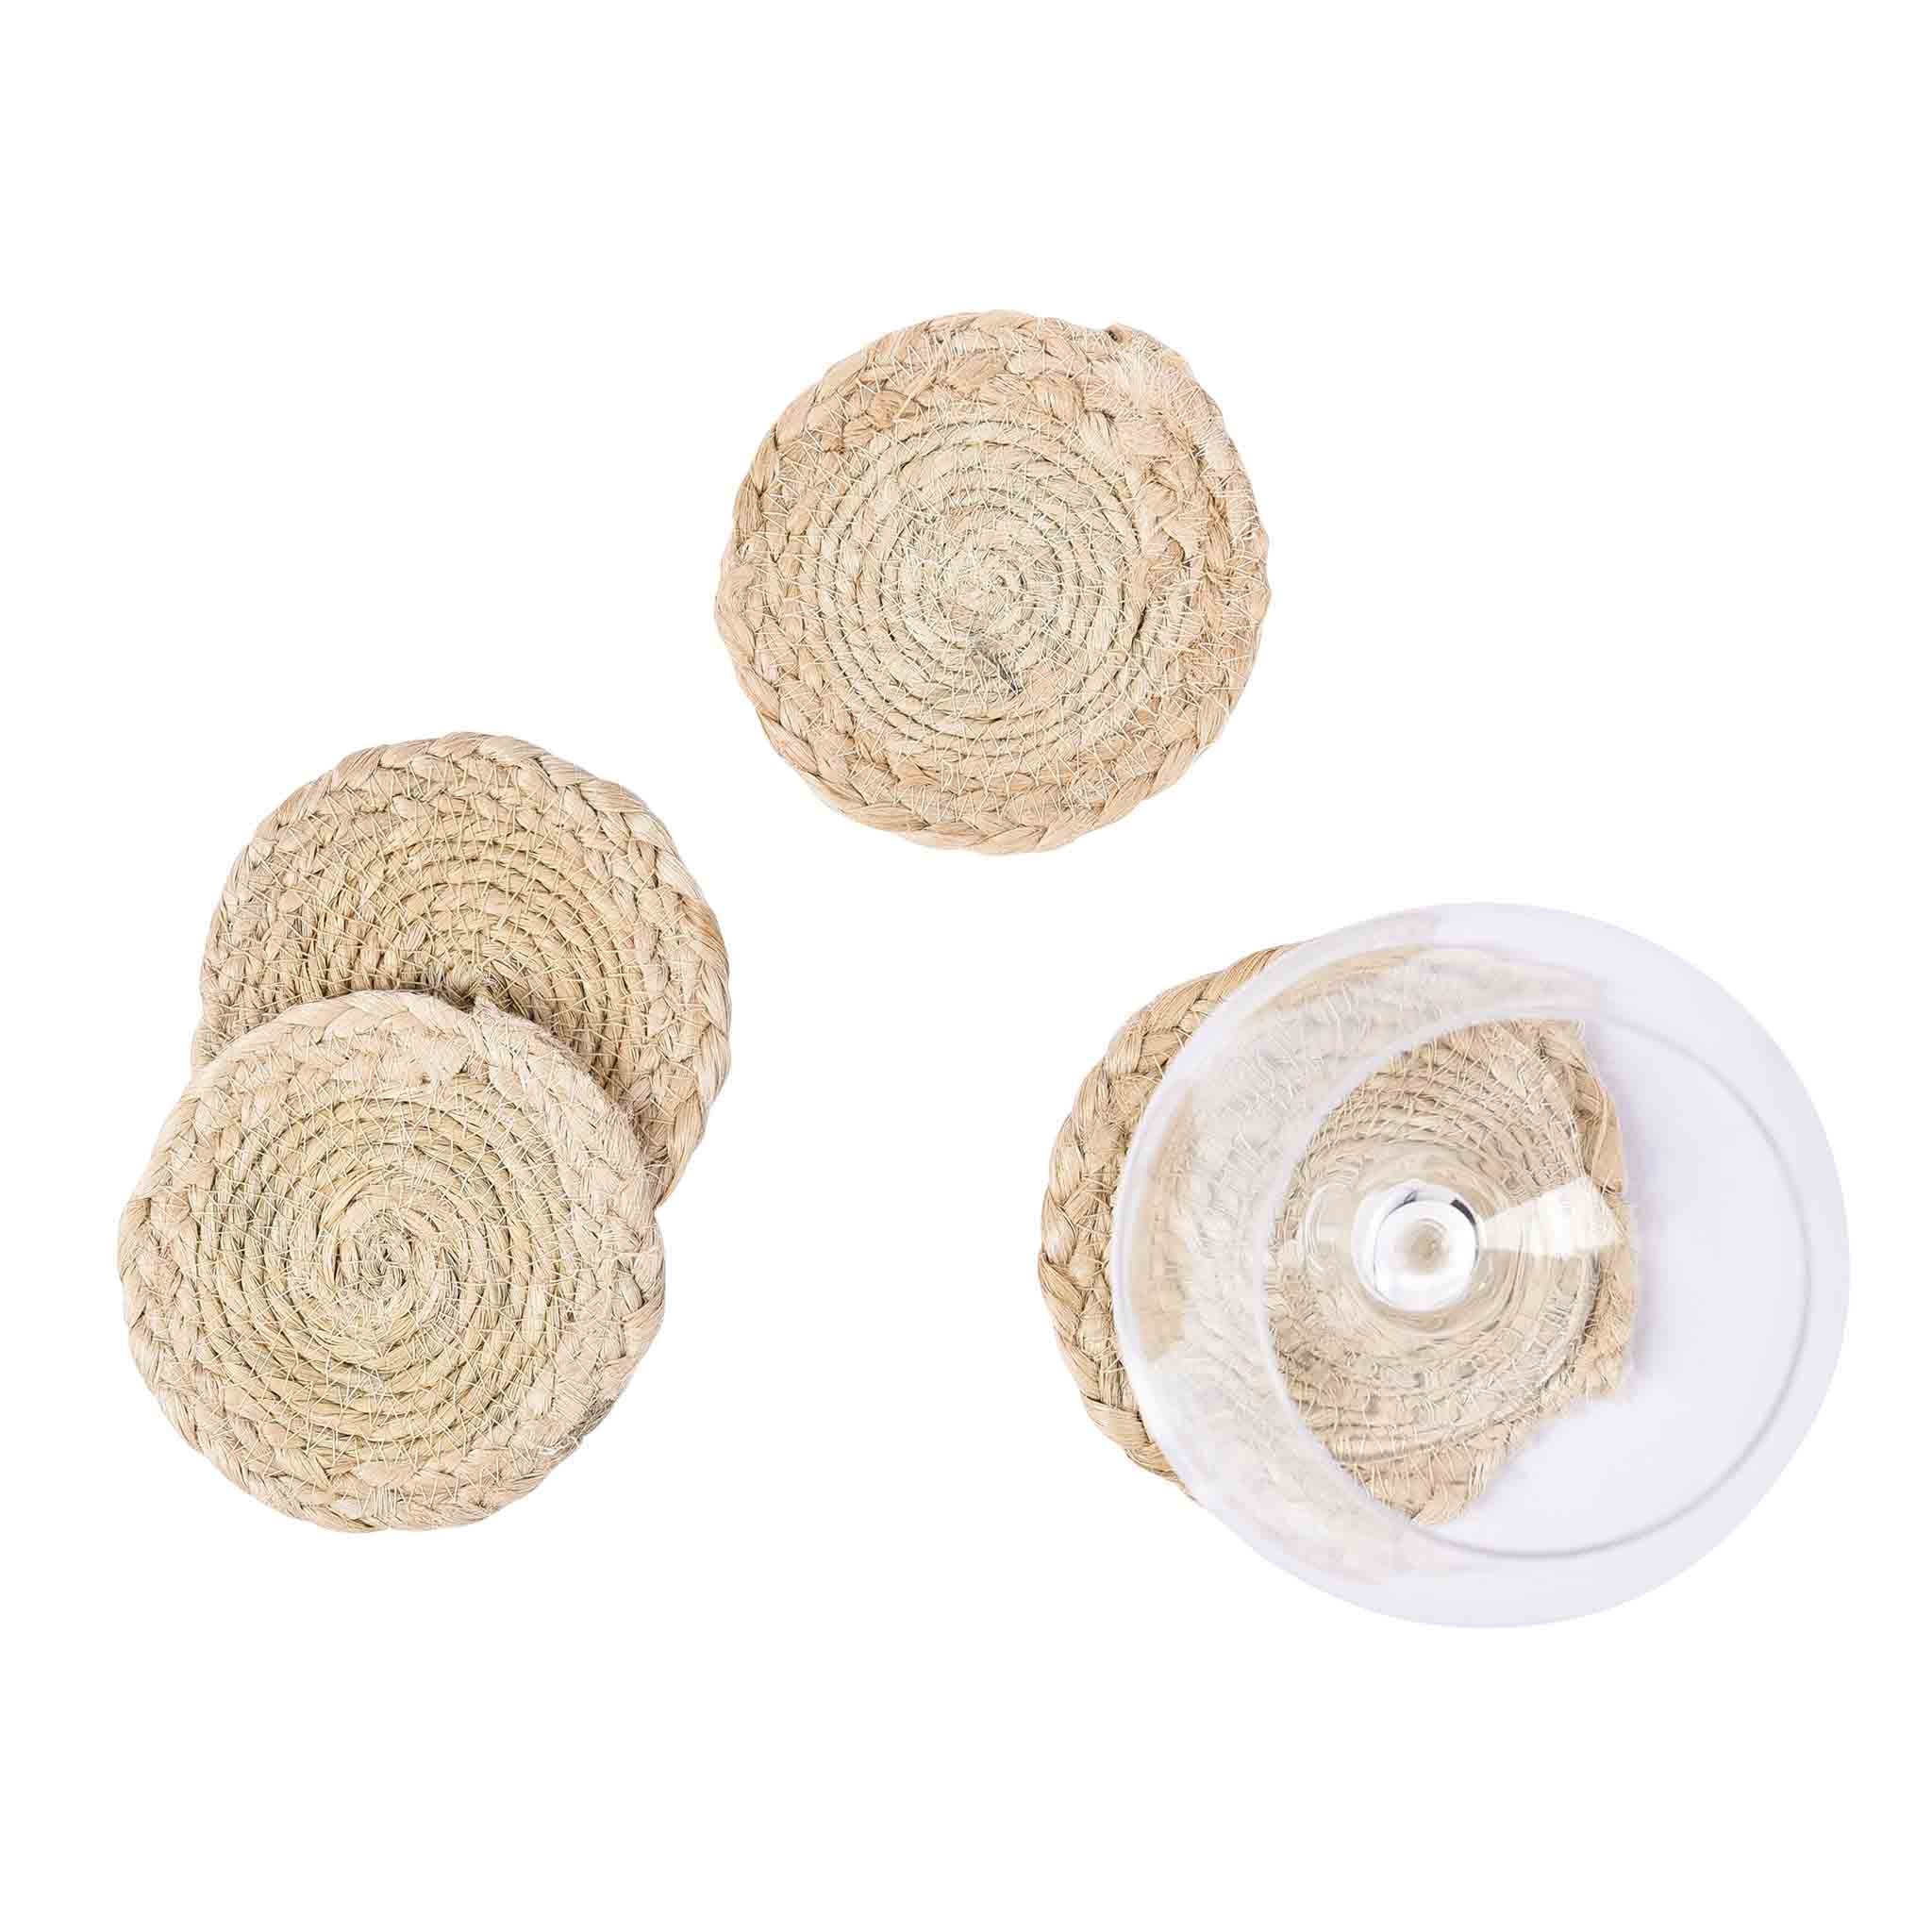 Braided Jute Coaster<br>Size: 5" Round<br>Set of 4<br>Color Natural